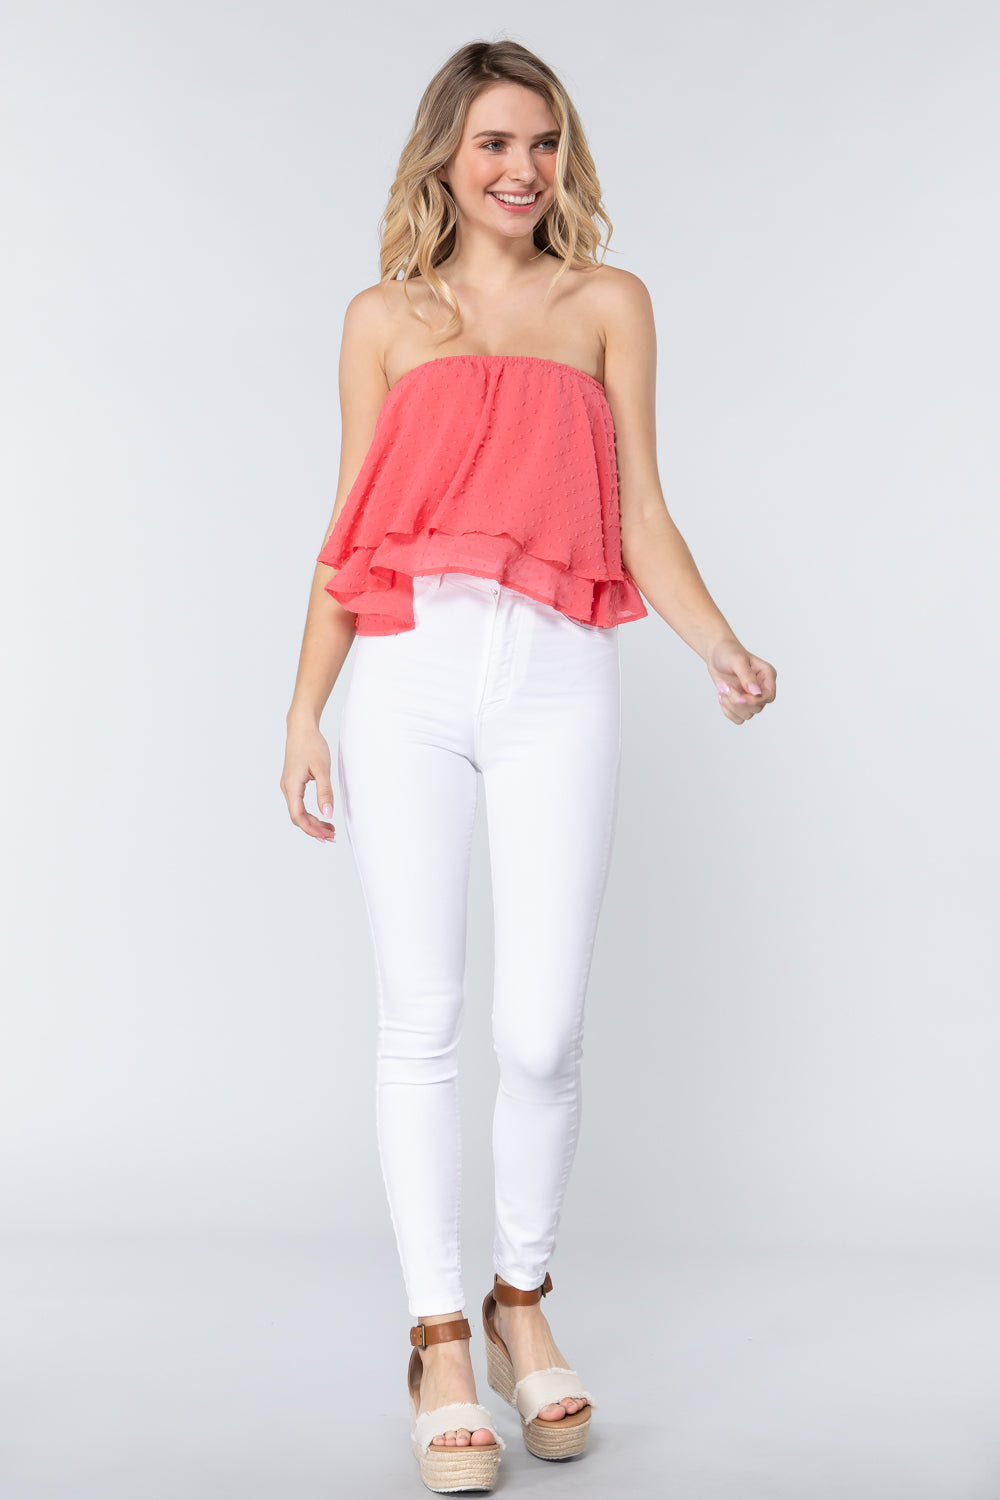 Cropped in Coral Tube Top